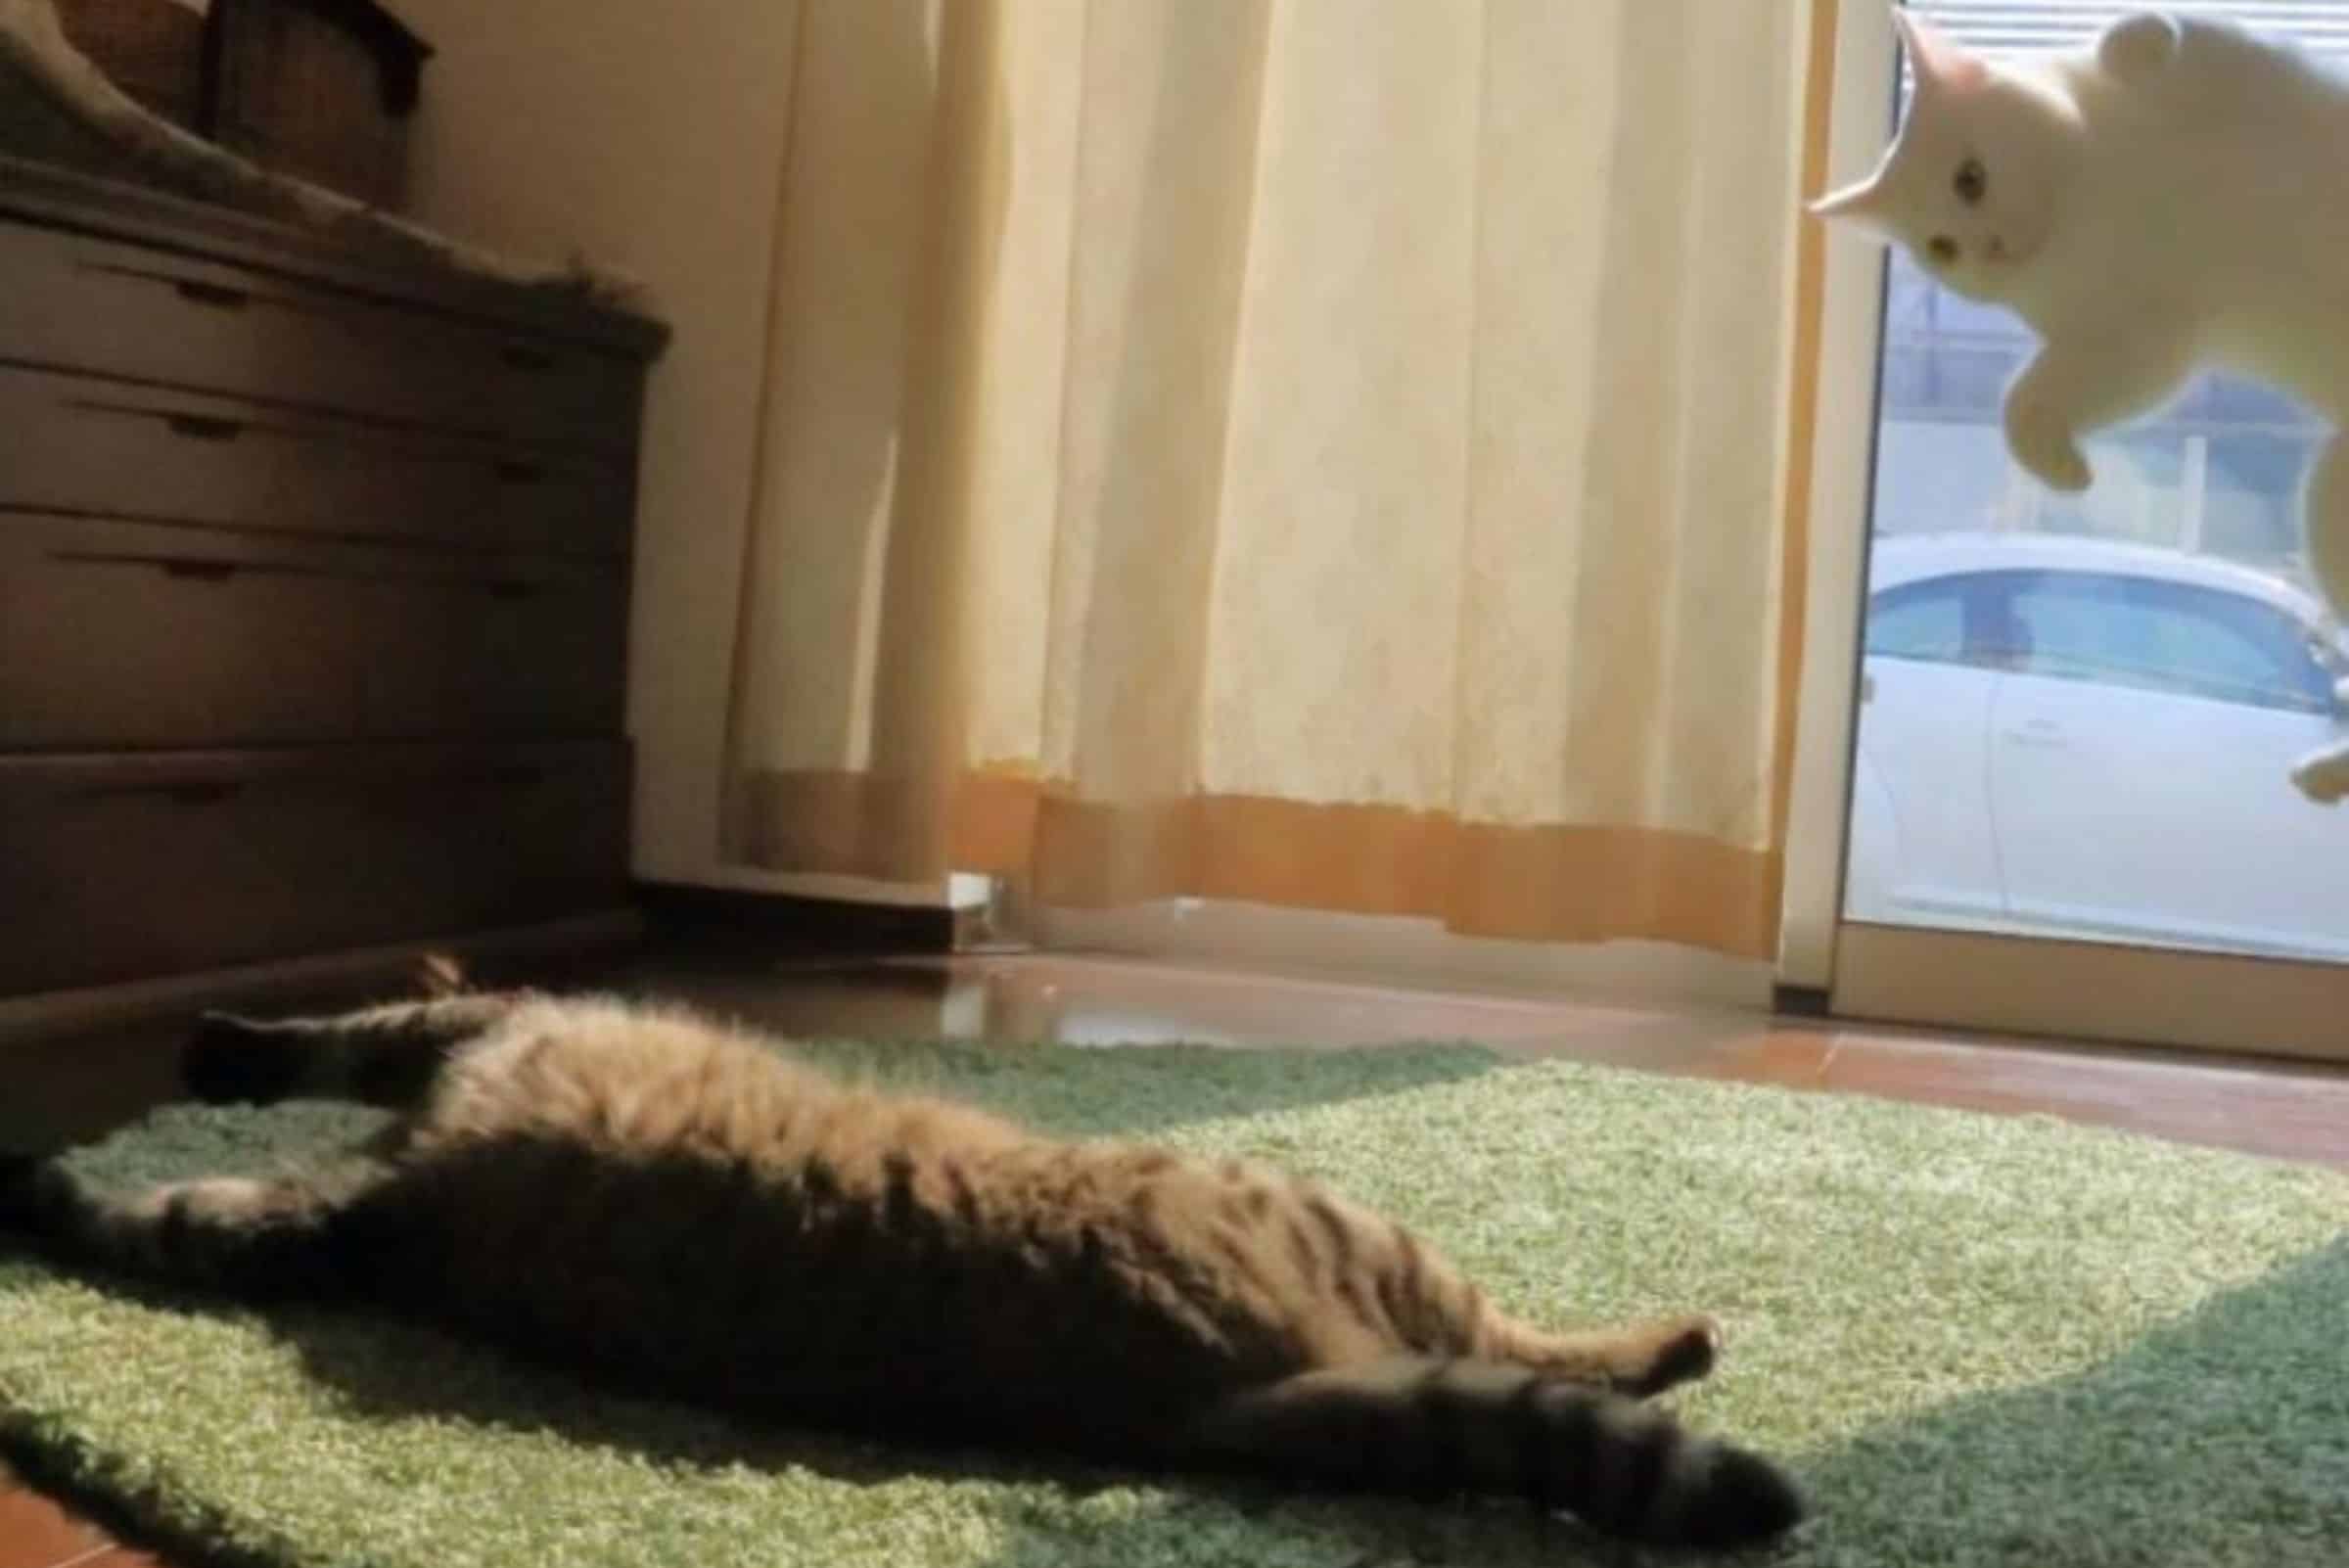 cat lying on the carpet and other cat jumping